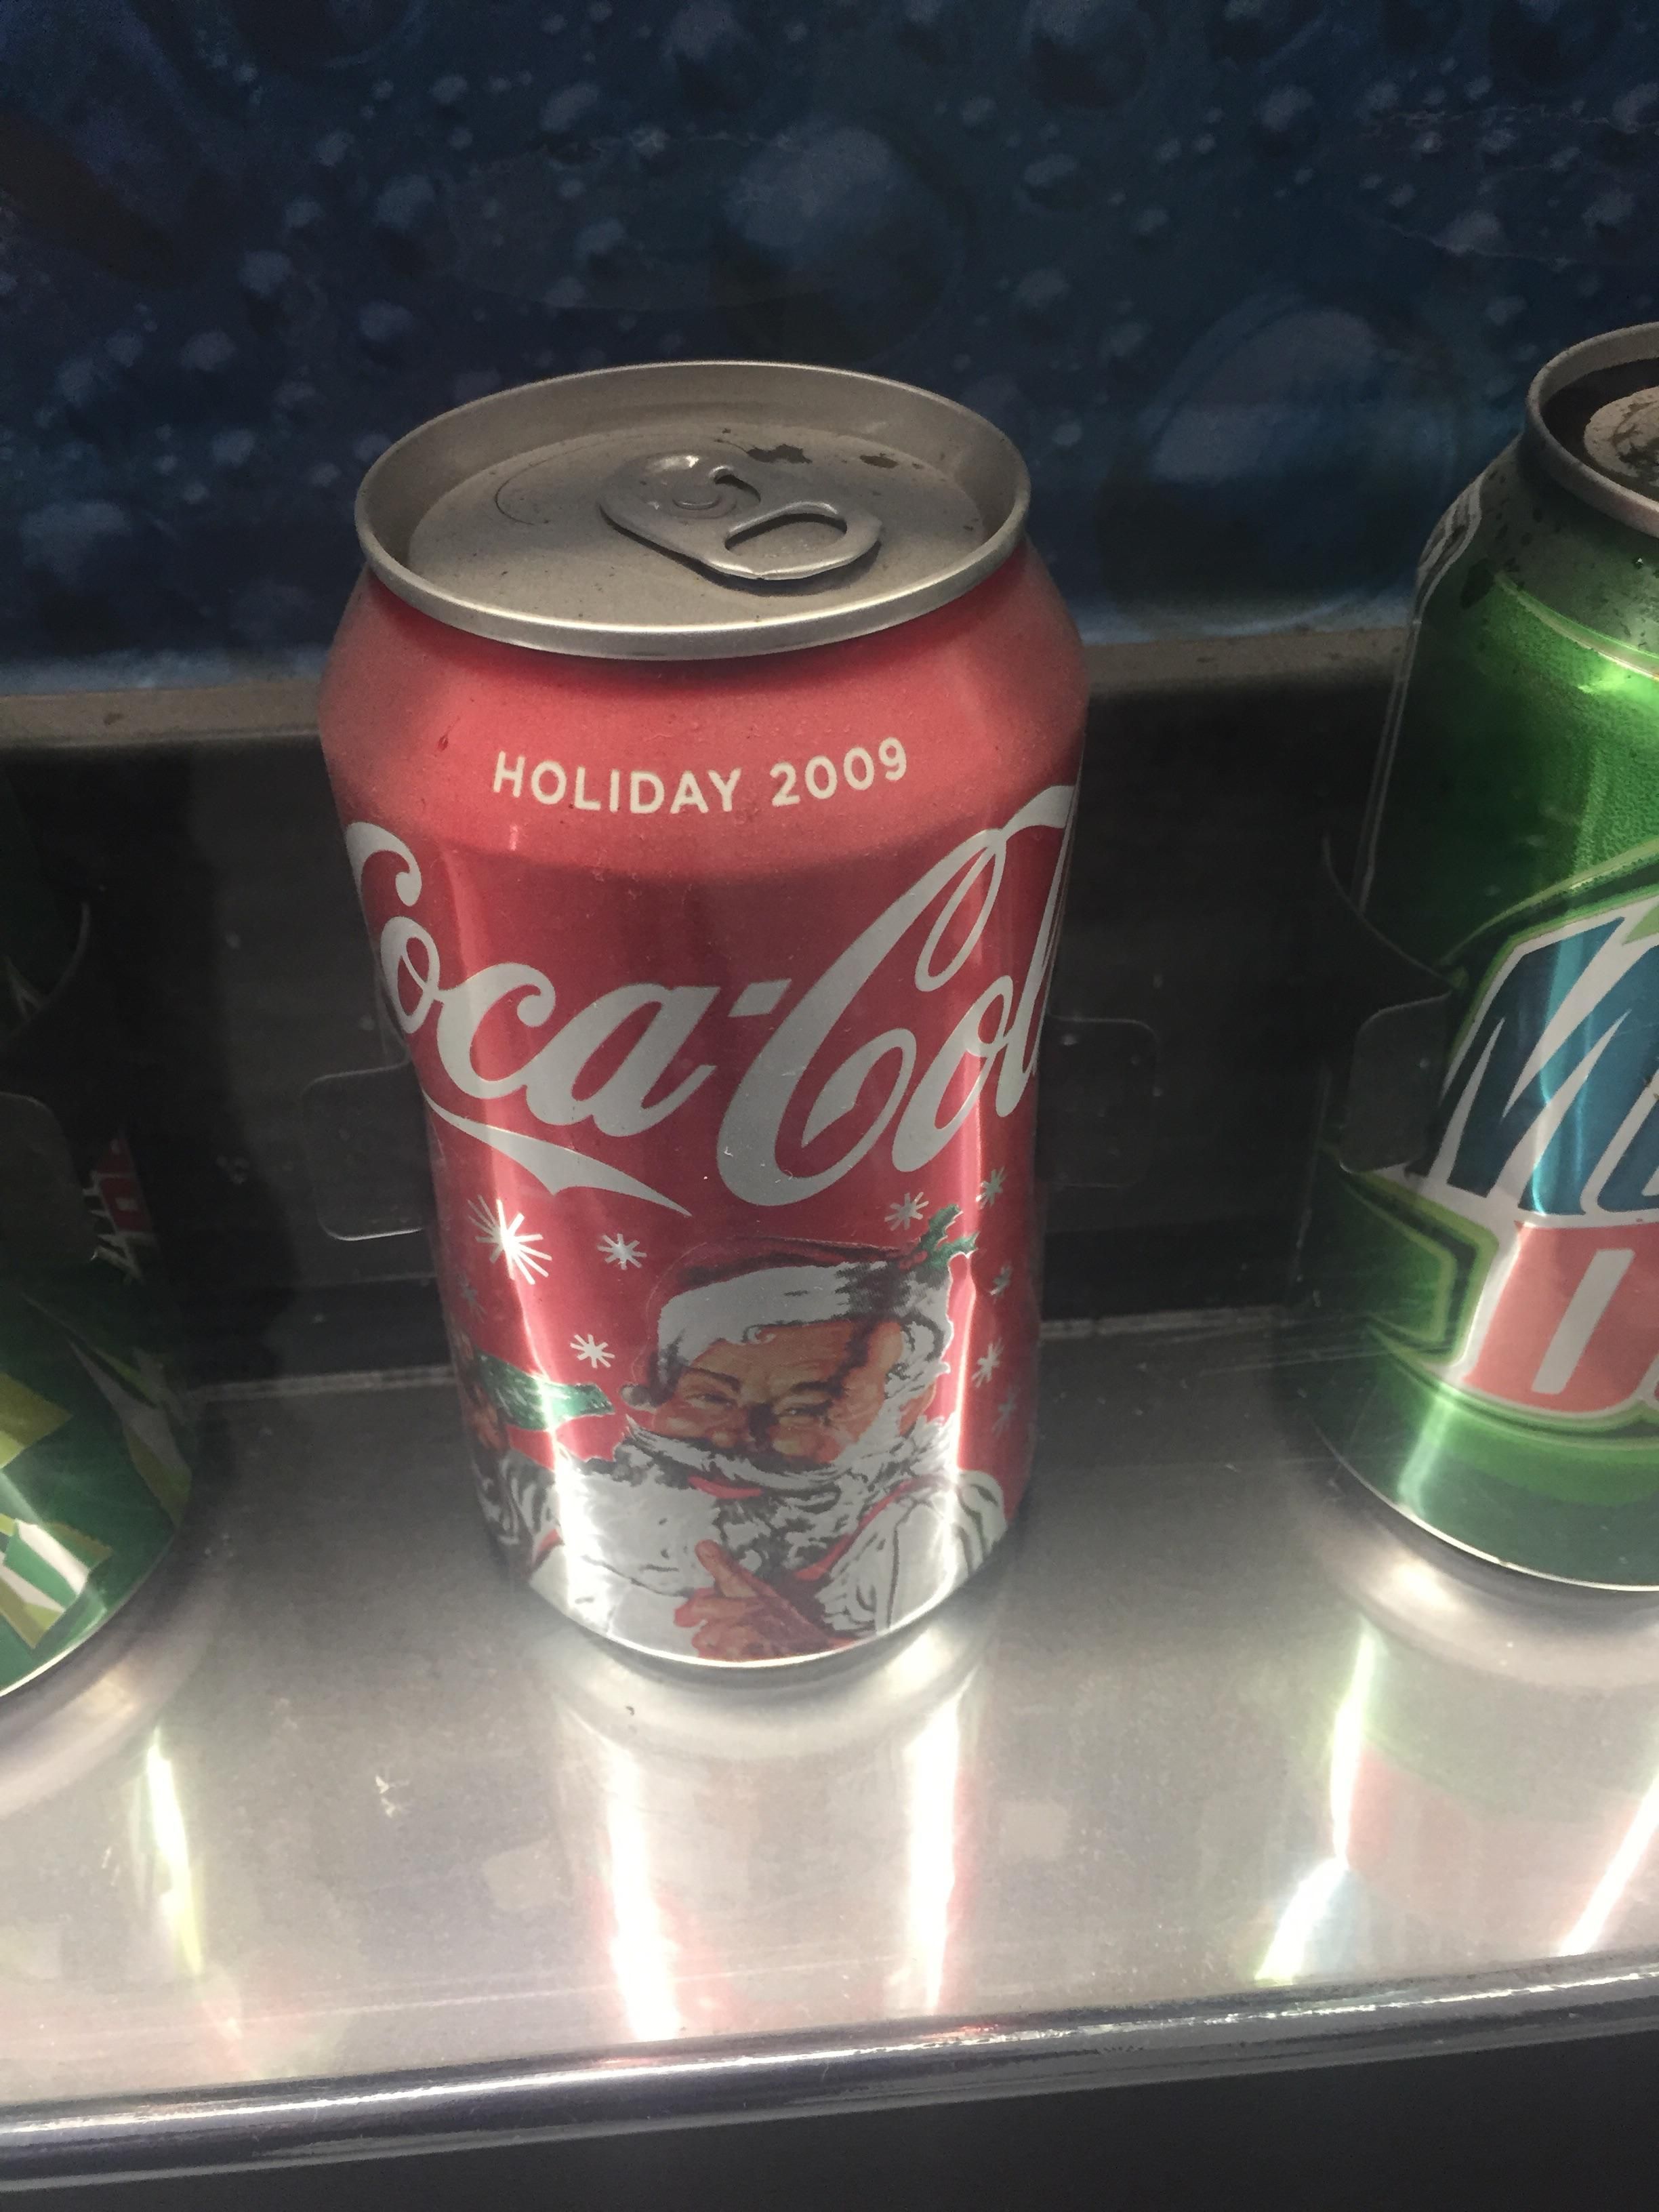 This coke I saw on display in this vending machine may need to be changed.